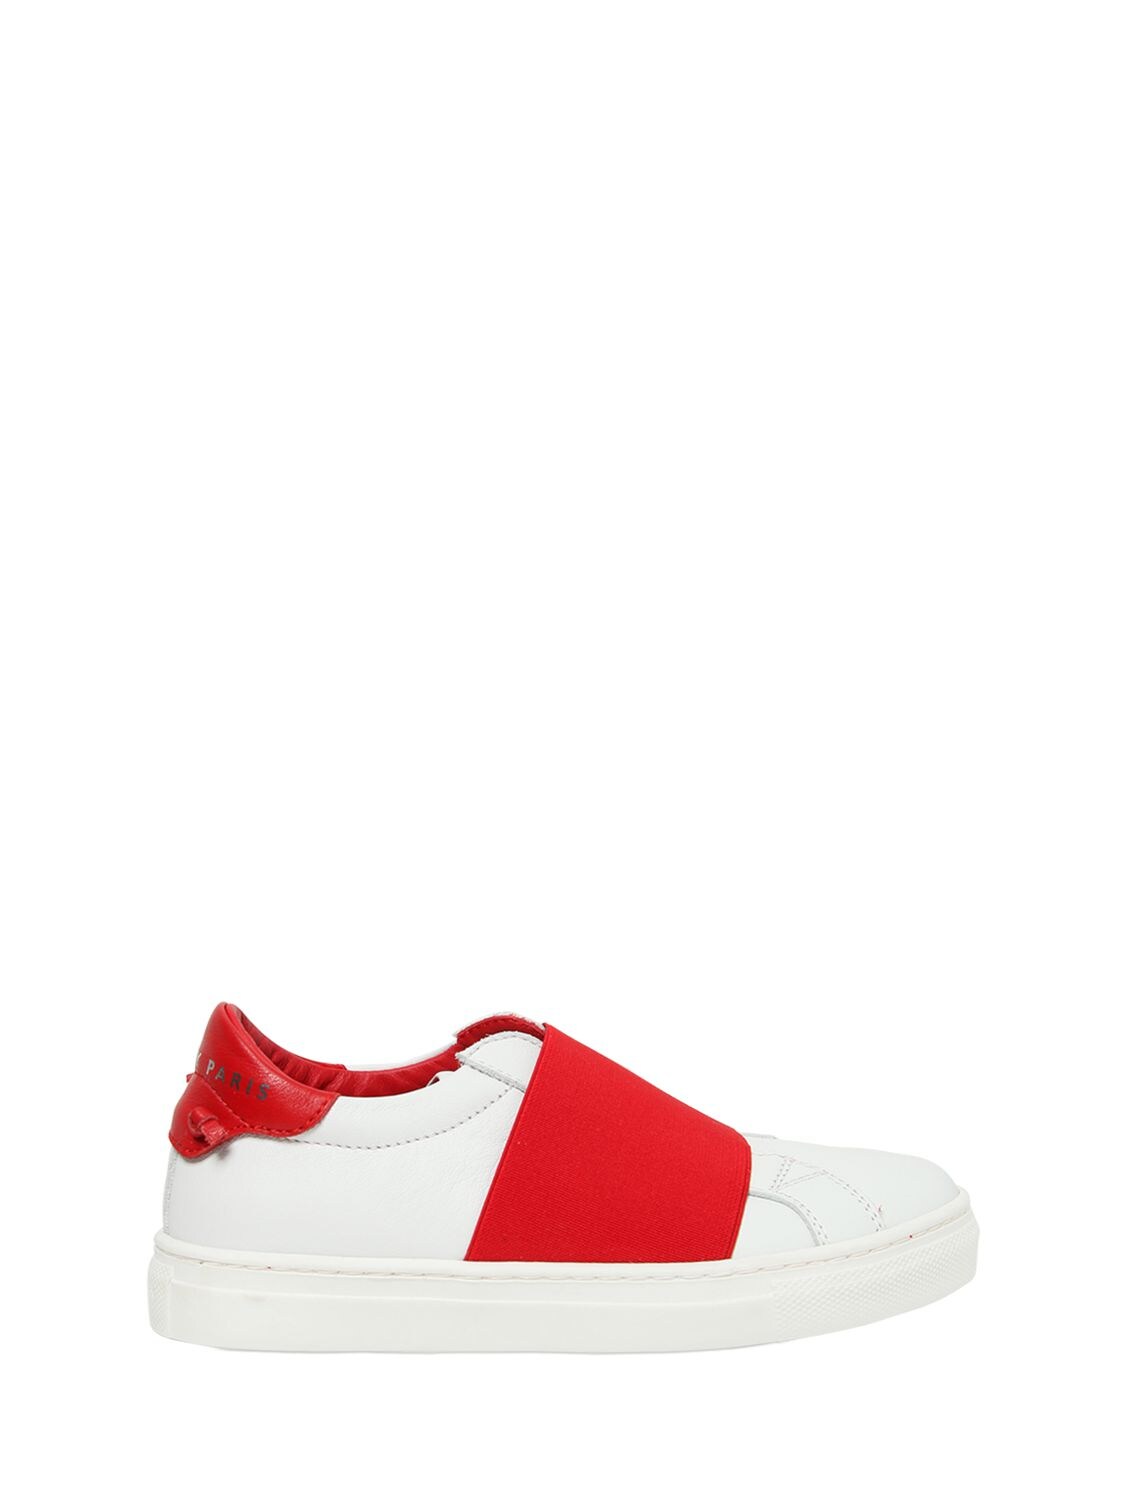 Givenchy Kids' Leather Slip-on Sneakers In Red,white